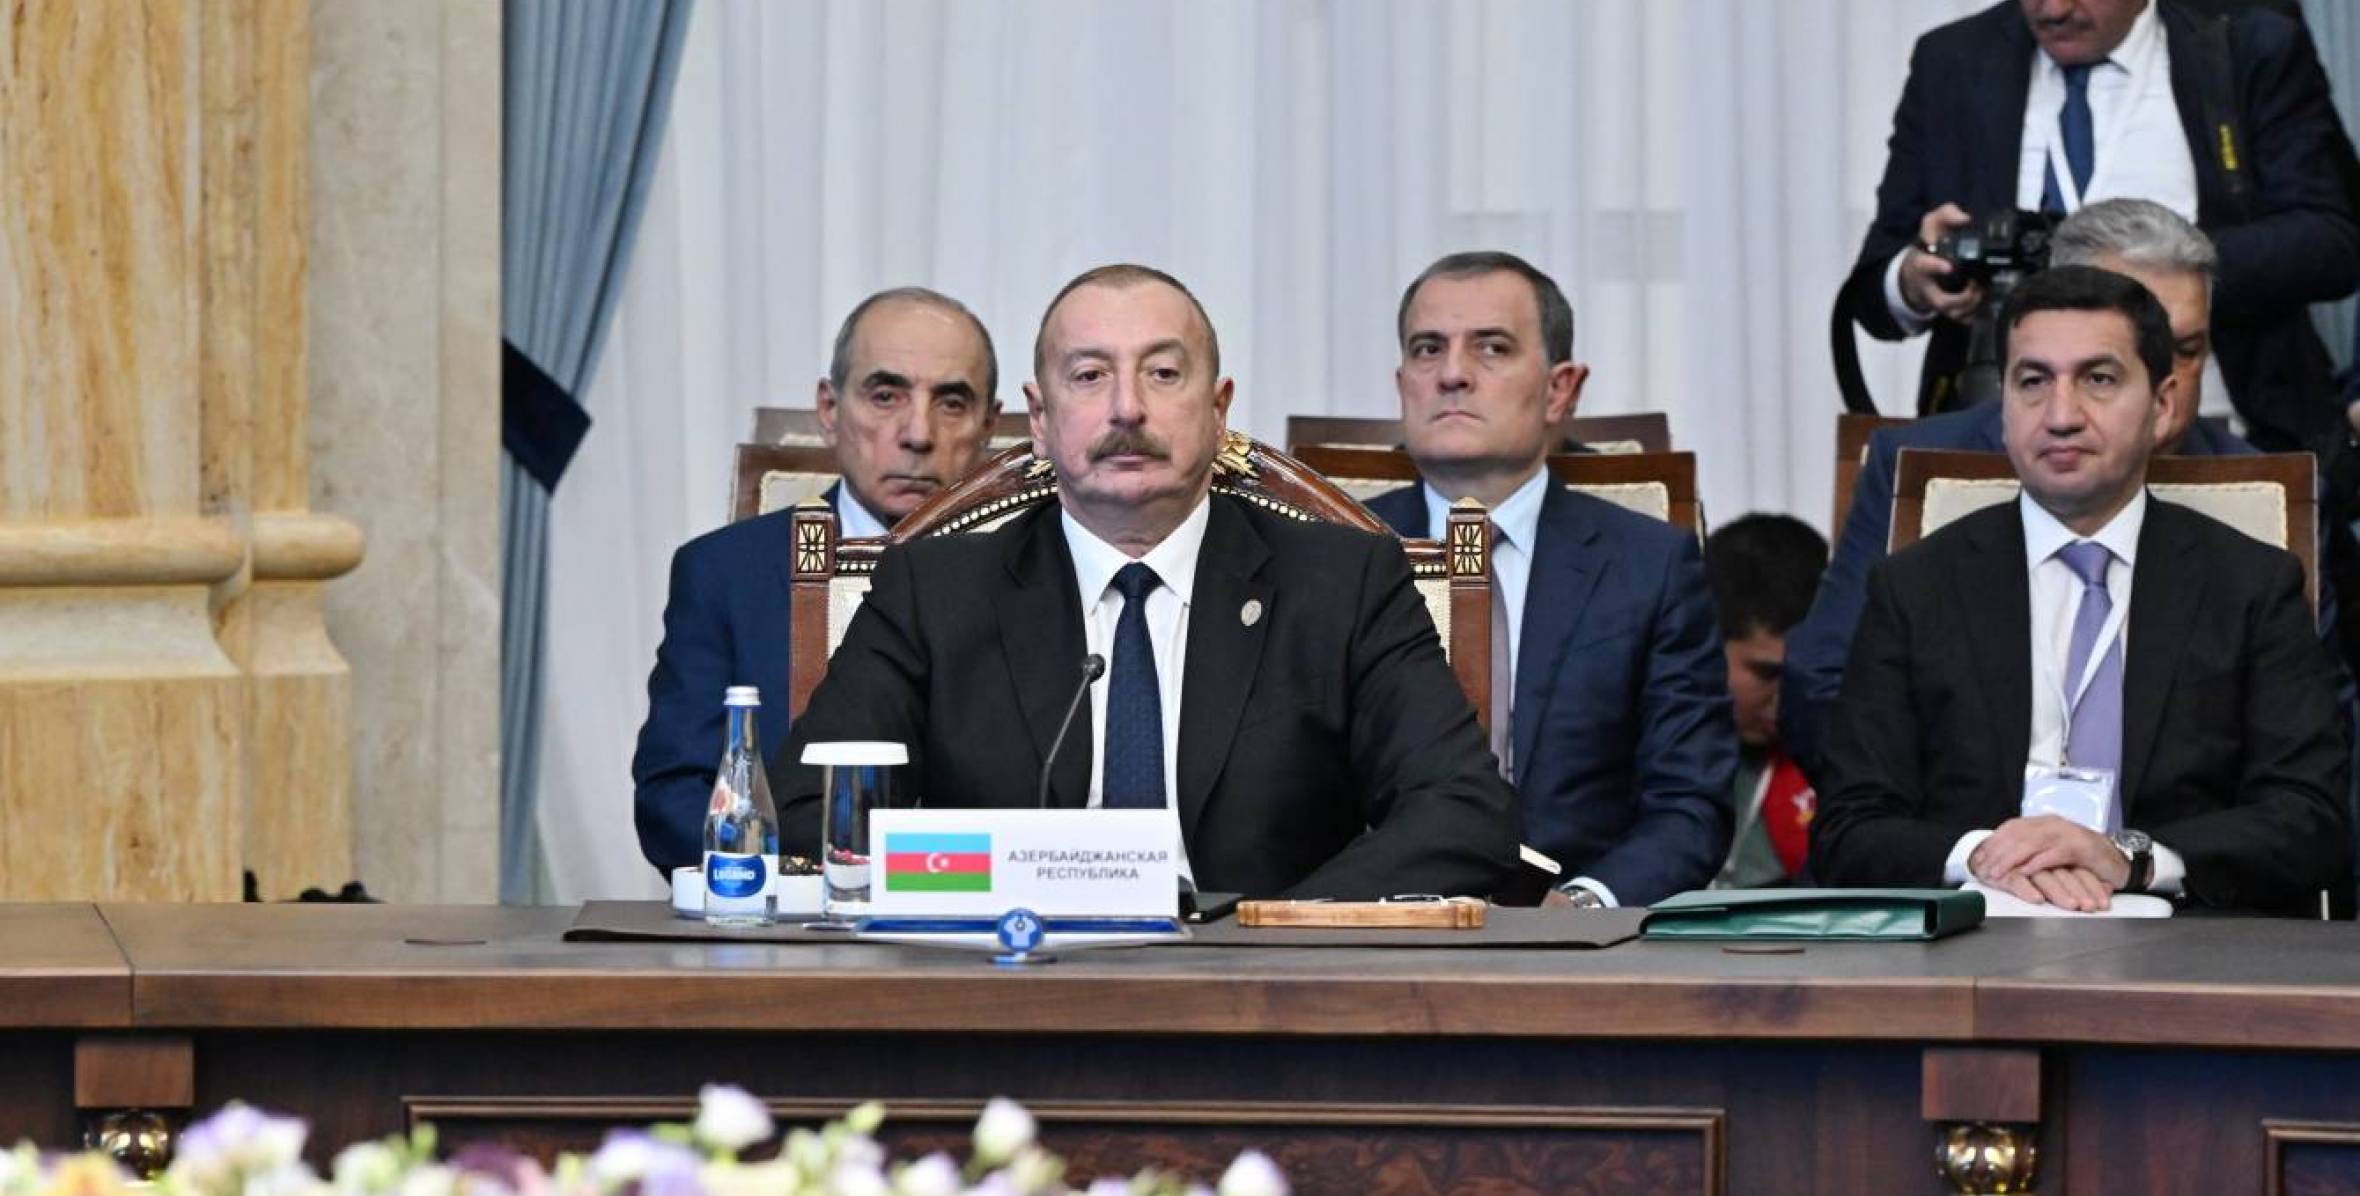 Speech by Ilham Aliyev at the limited meeting of CIS Heads of State Council in Bishkek